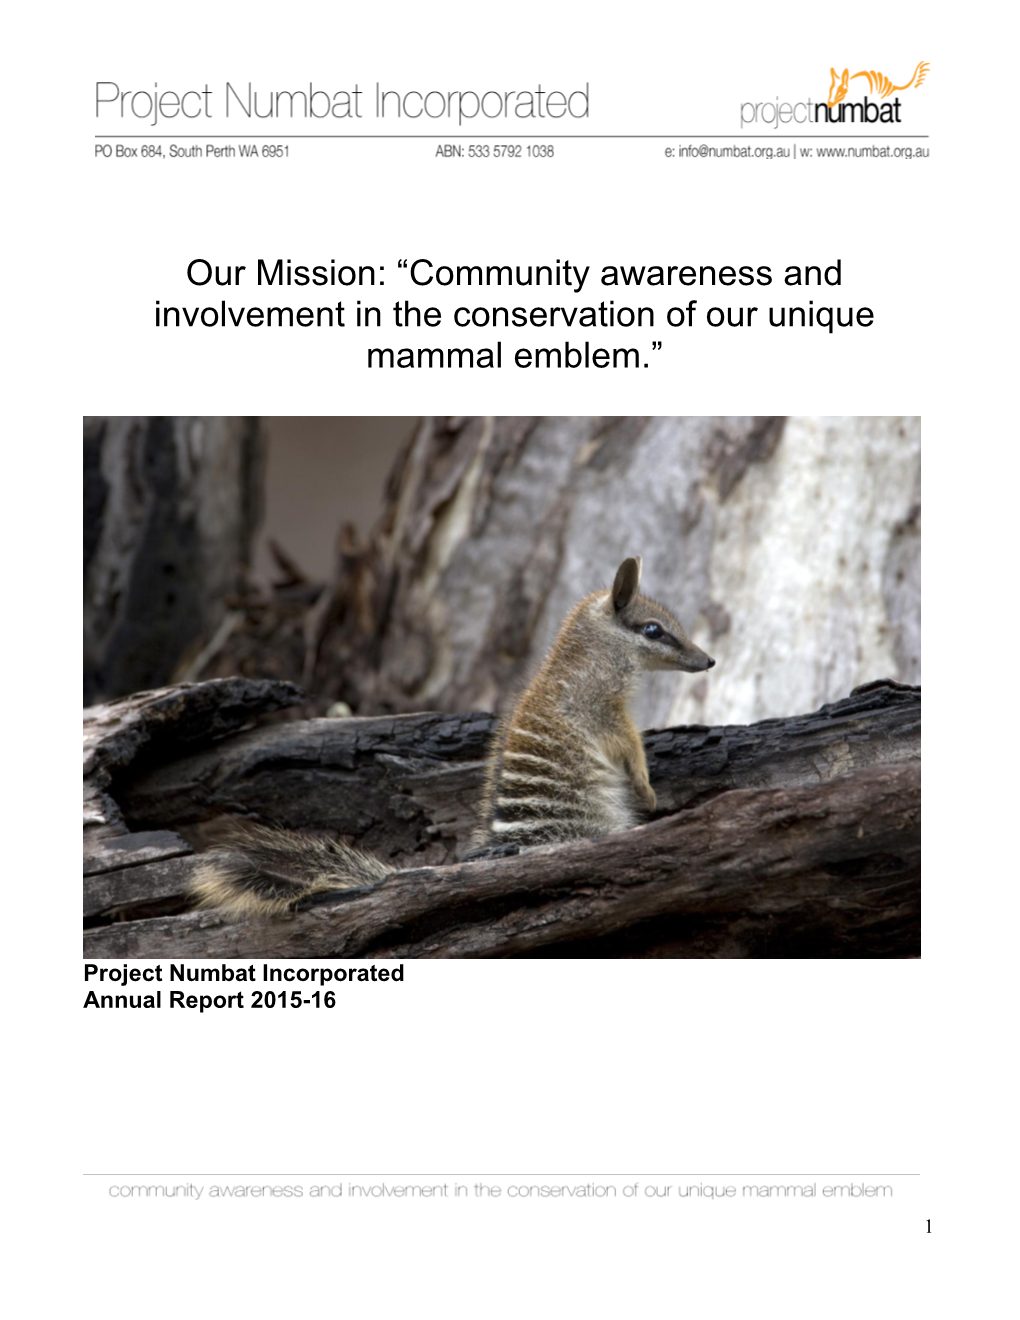 Our Mission: “Community Awareness and Involvement in the Conservation of Our Unique Mammal Emblem.”